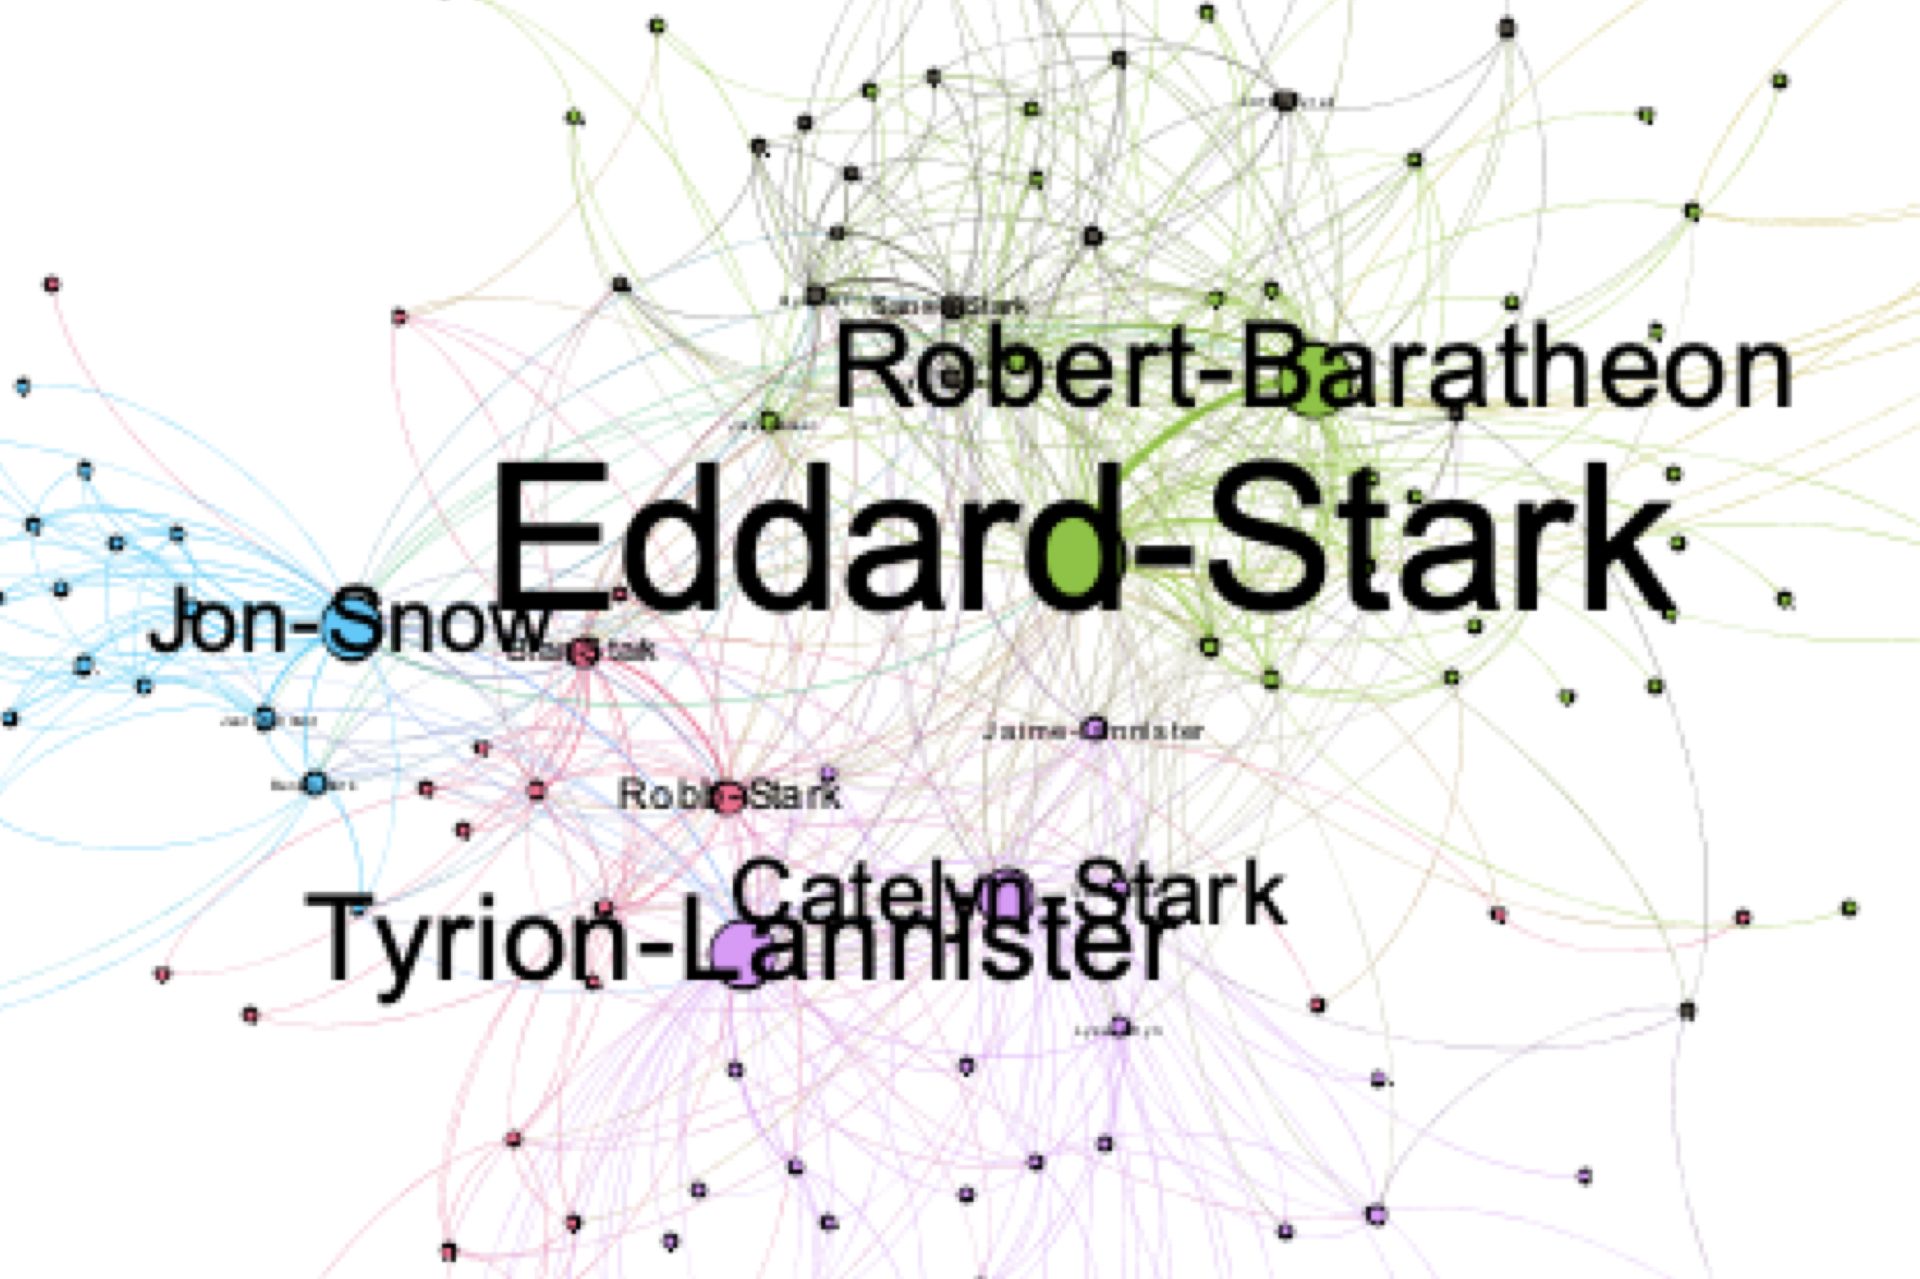 /how-to-analyze-and-visualize-the-game-of-thrones-character-relationships-km4c3ere feature image